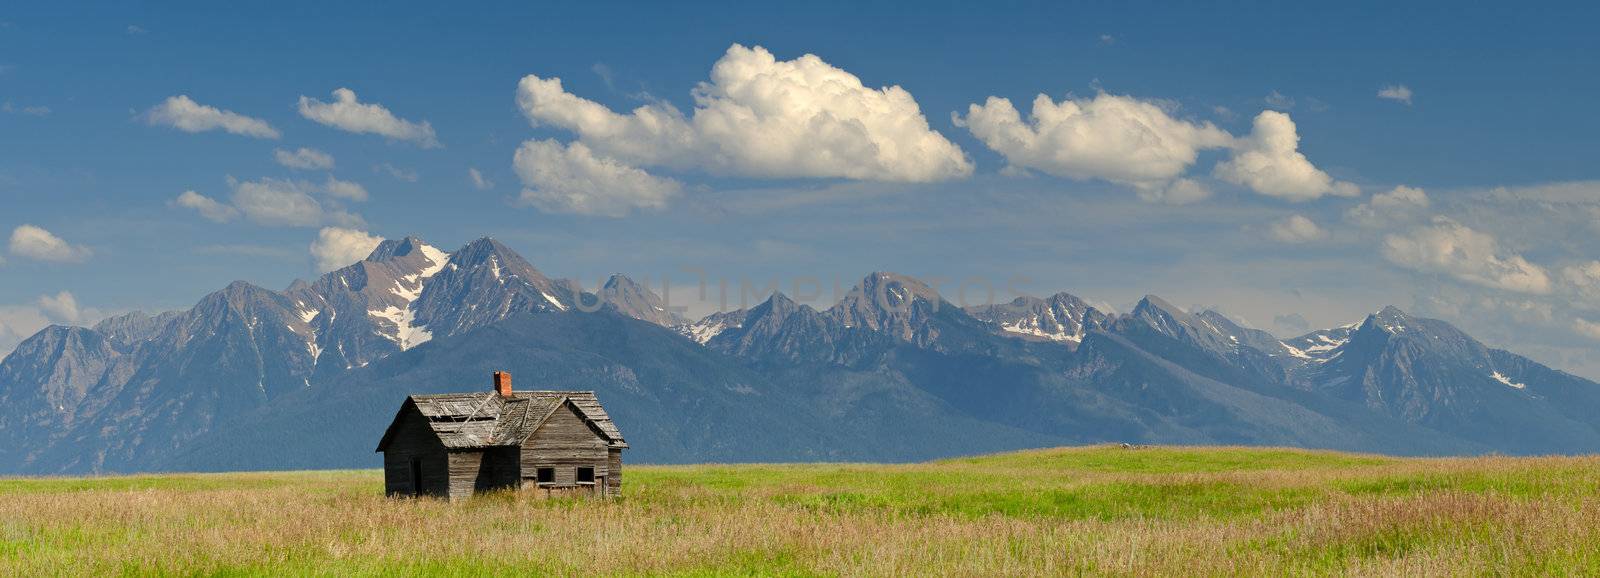 Panorama of an abandoned cabin and the Mission Mountains, Lake County, Montana, USA